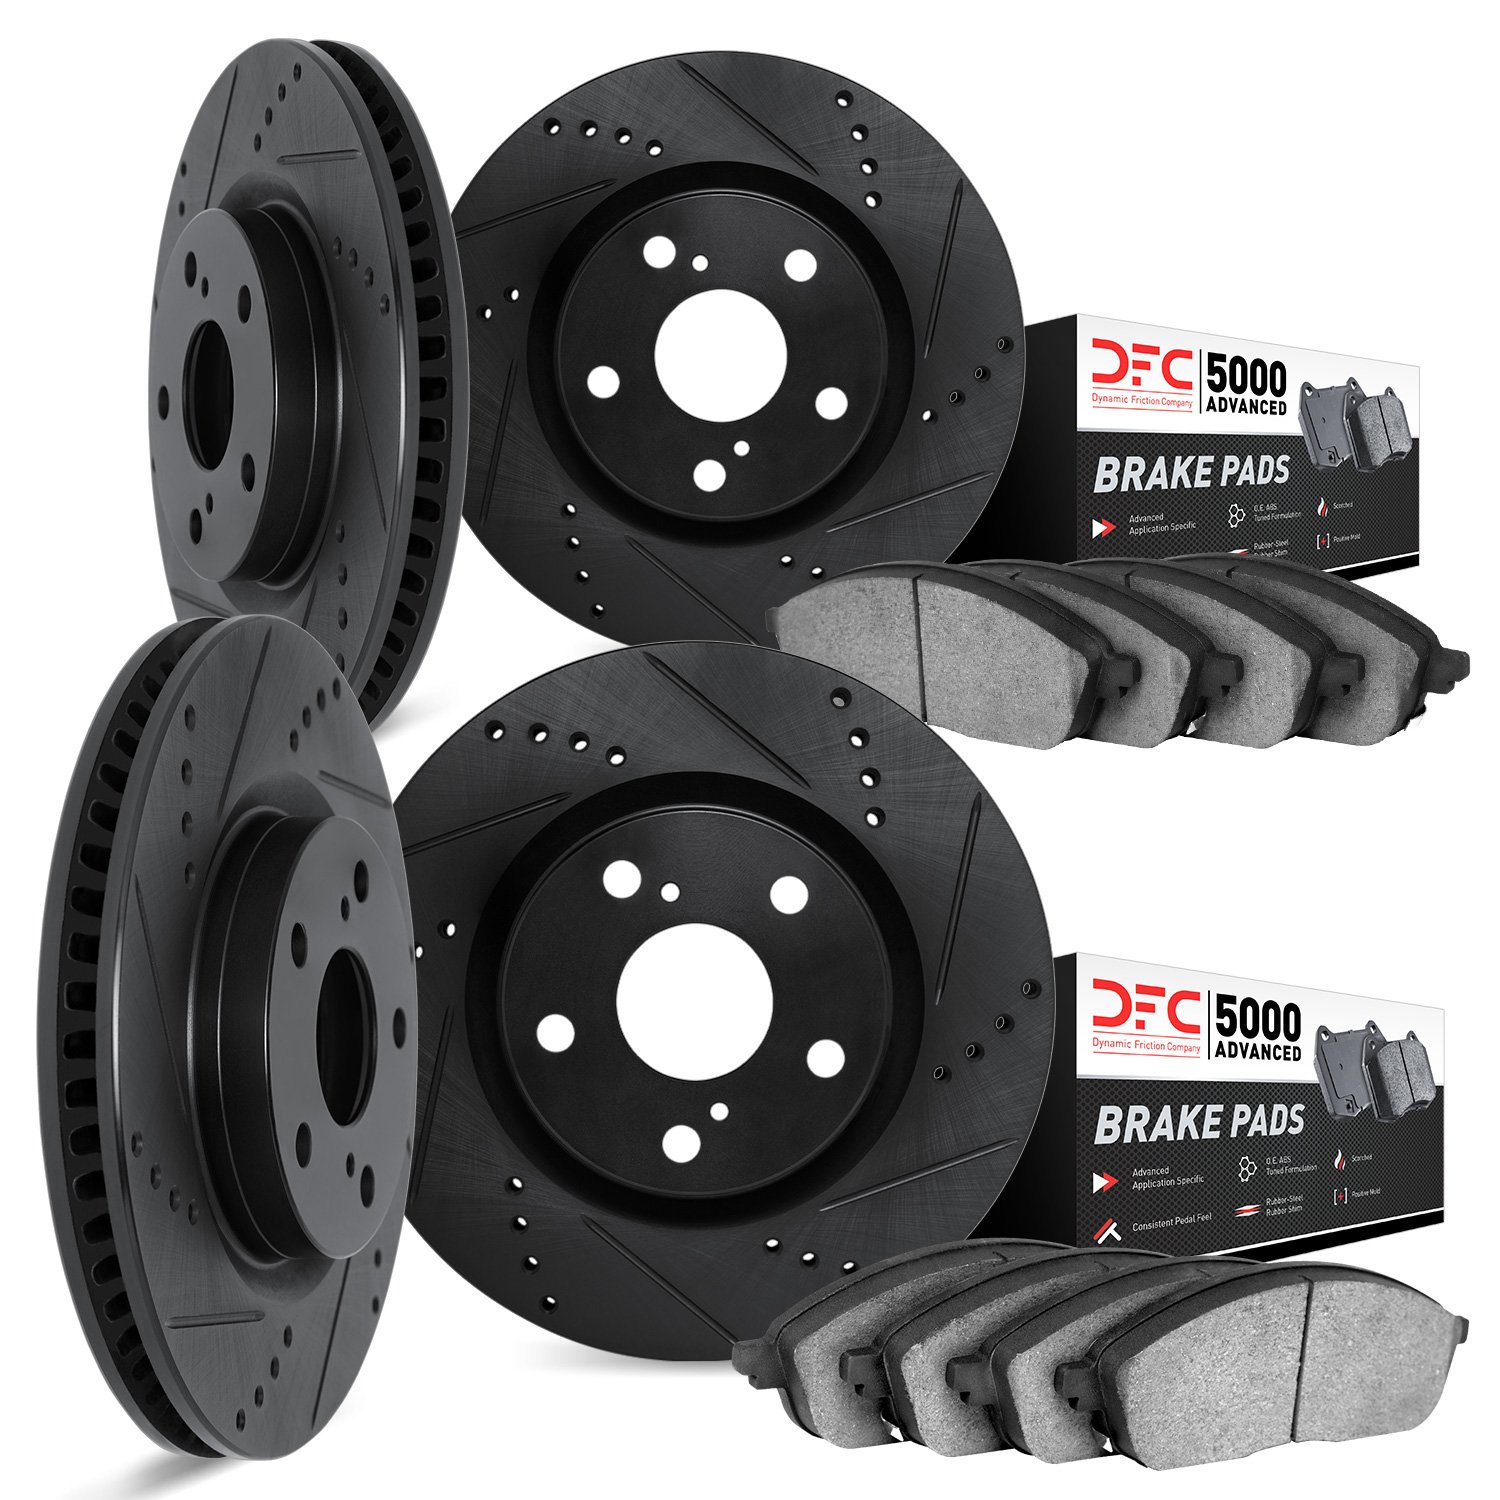 8504-31083 Drilled/Slotted Brake Rotors w/5000 Advanced Brake Pads Kit [Black], 2017-2020 BMW, Position: Front and Rear